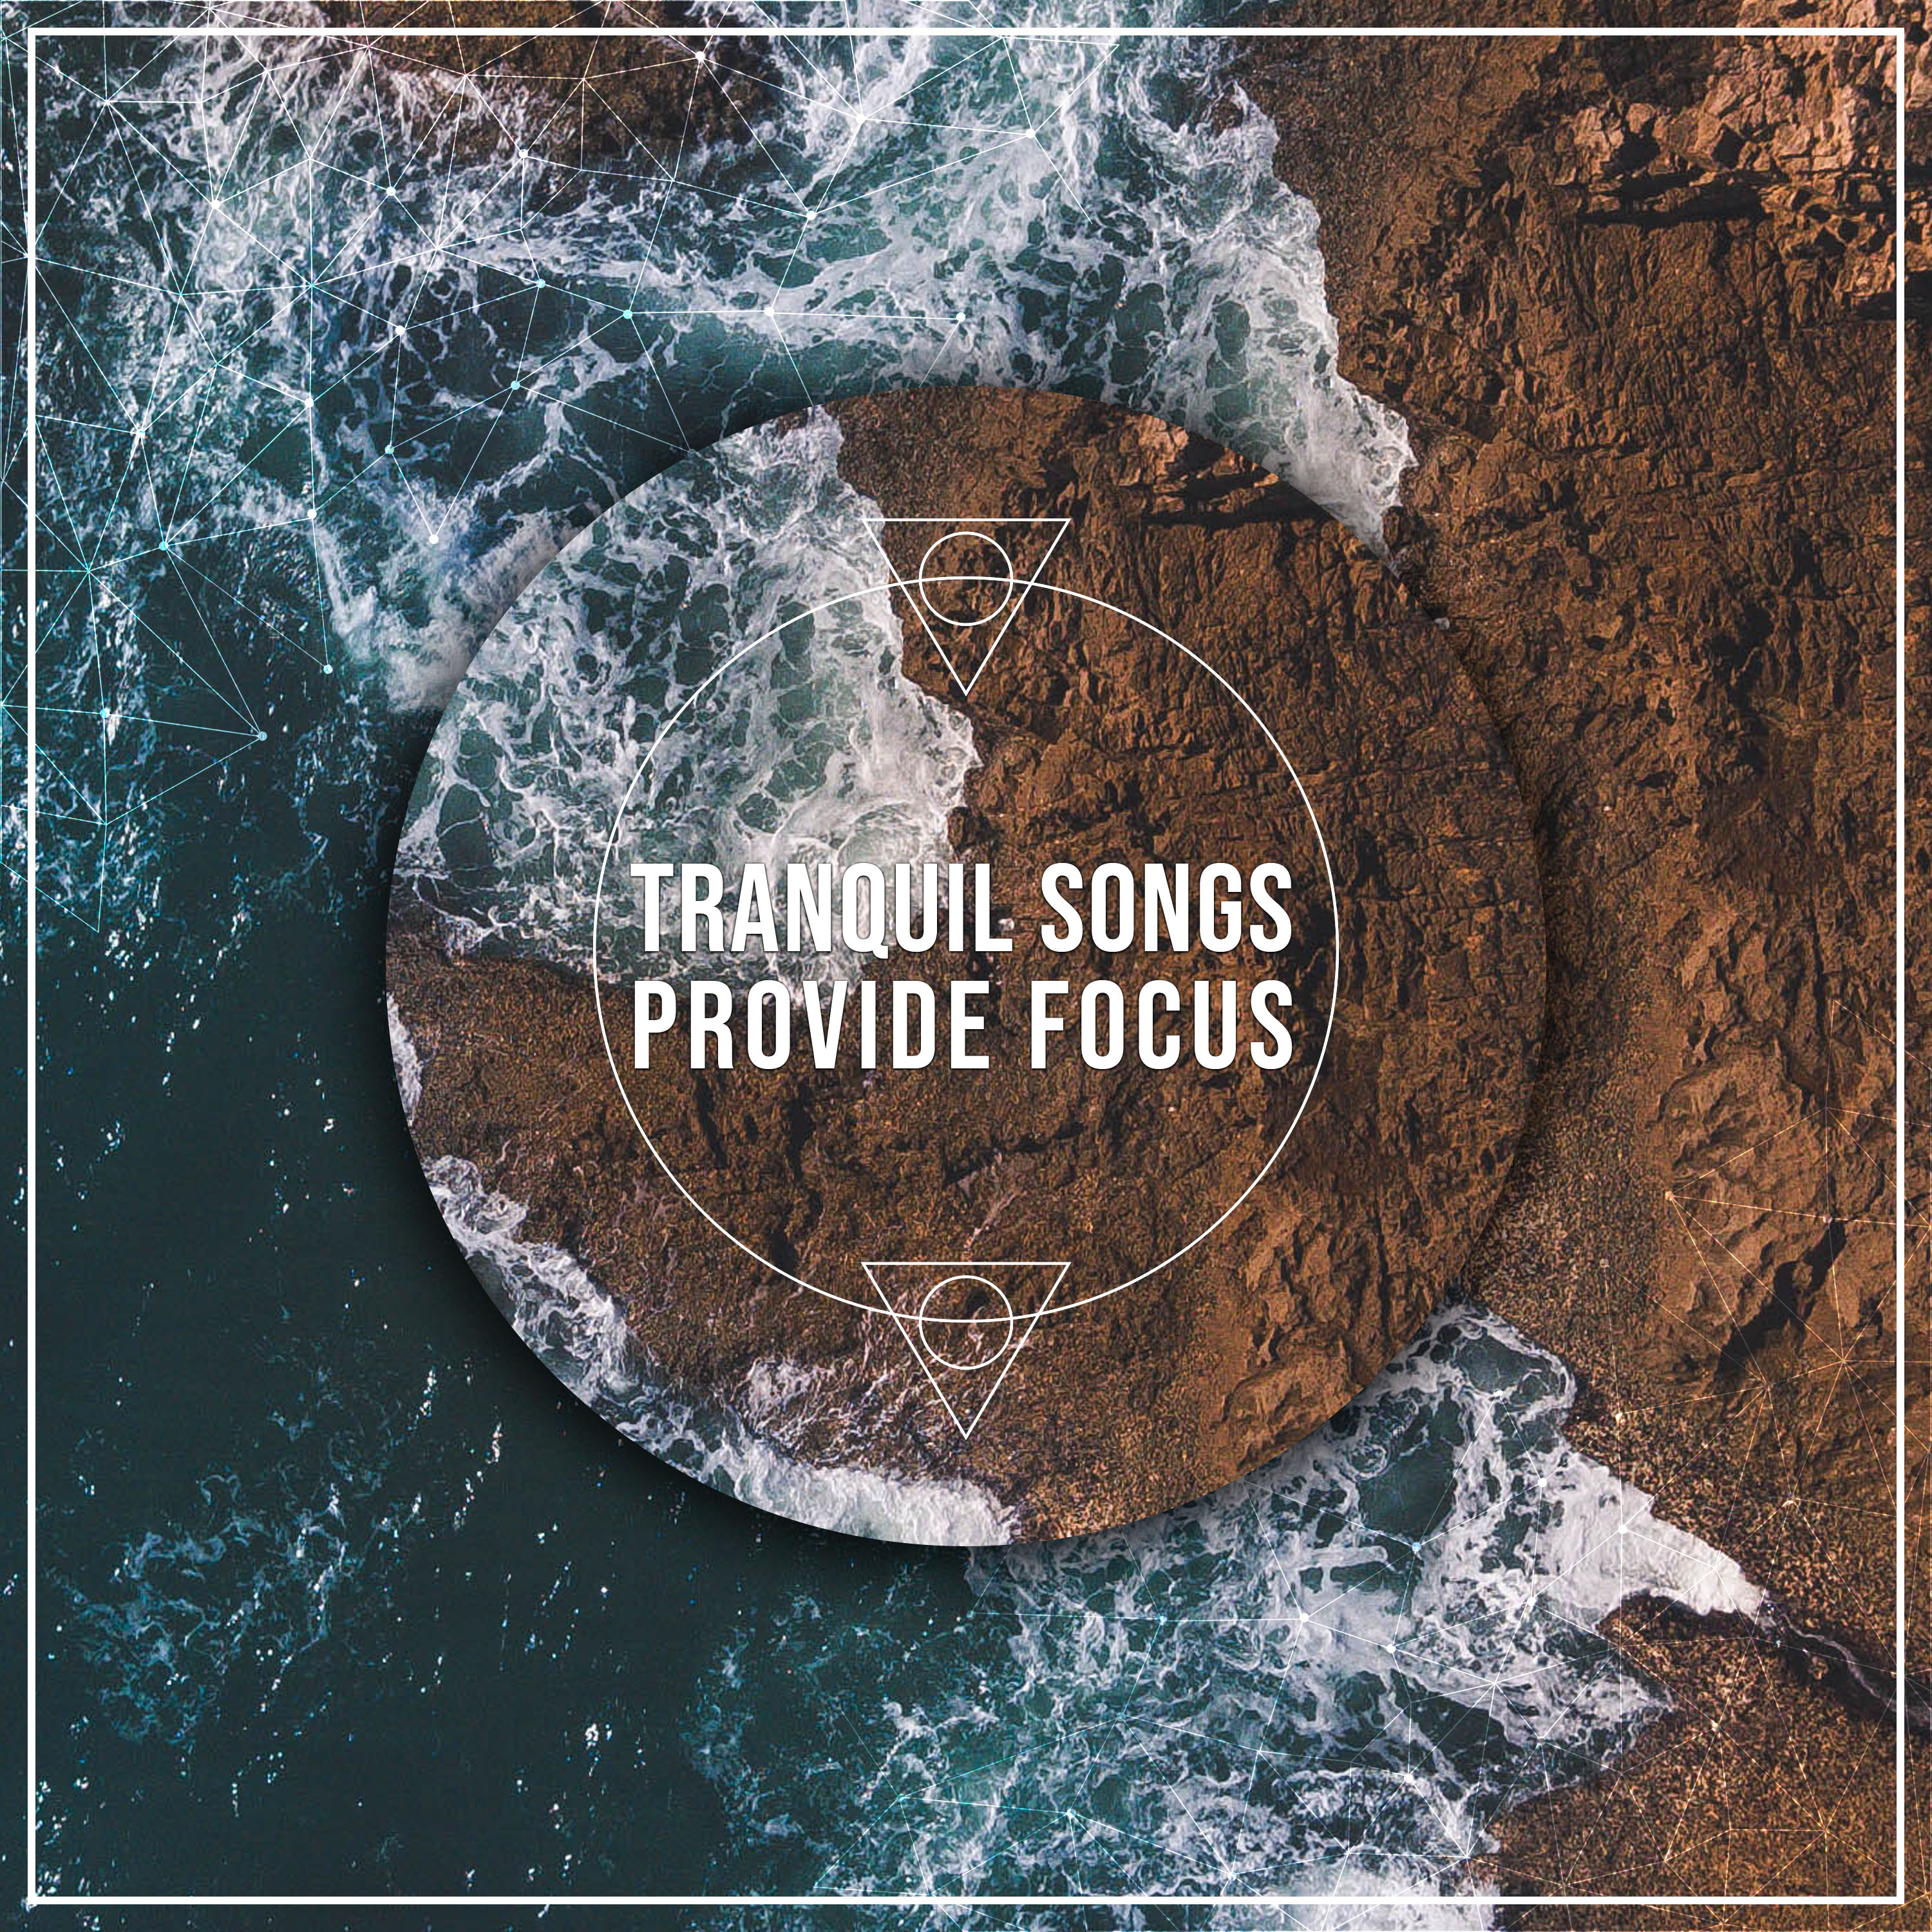 13 Tranquil Songs to Provide Focus